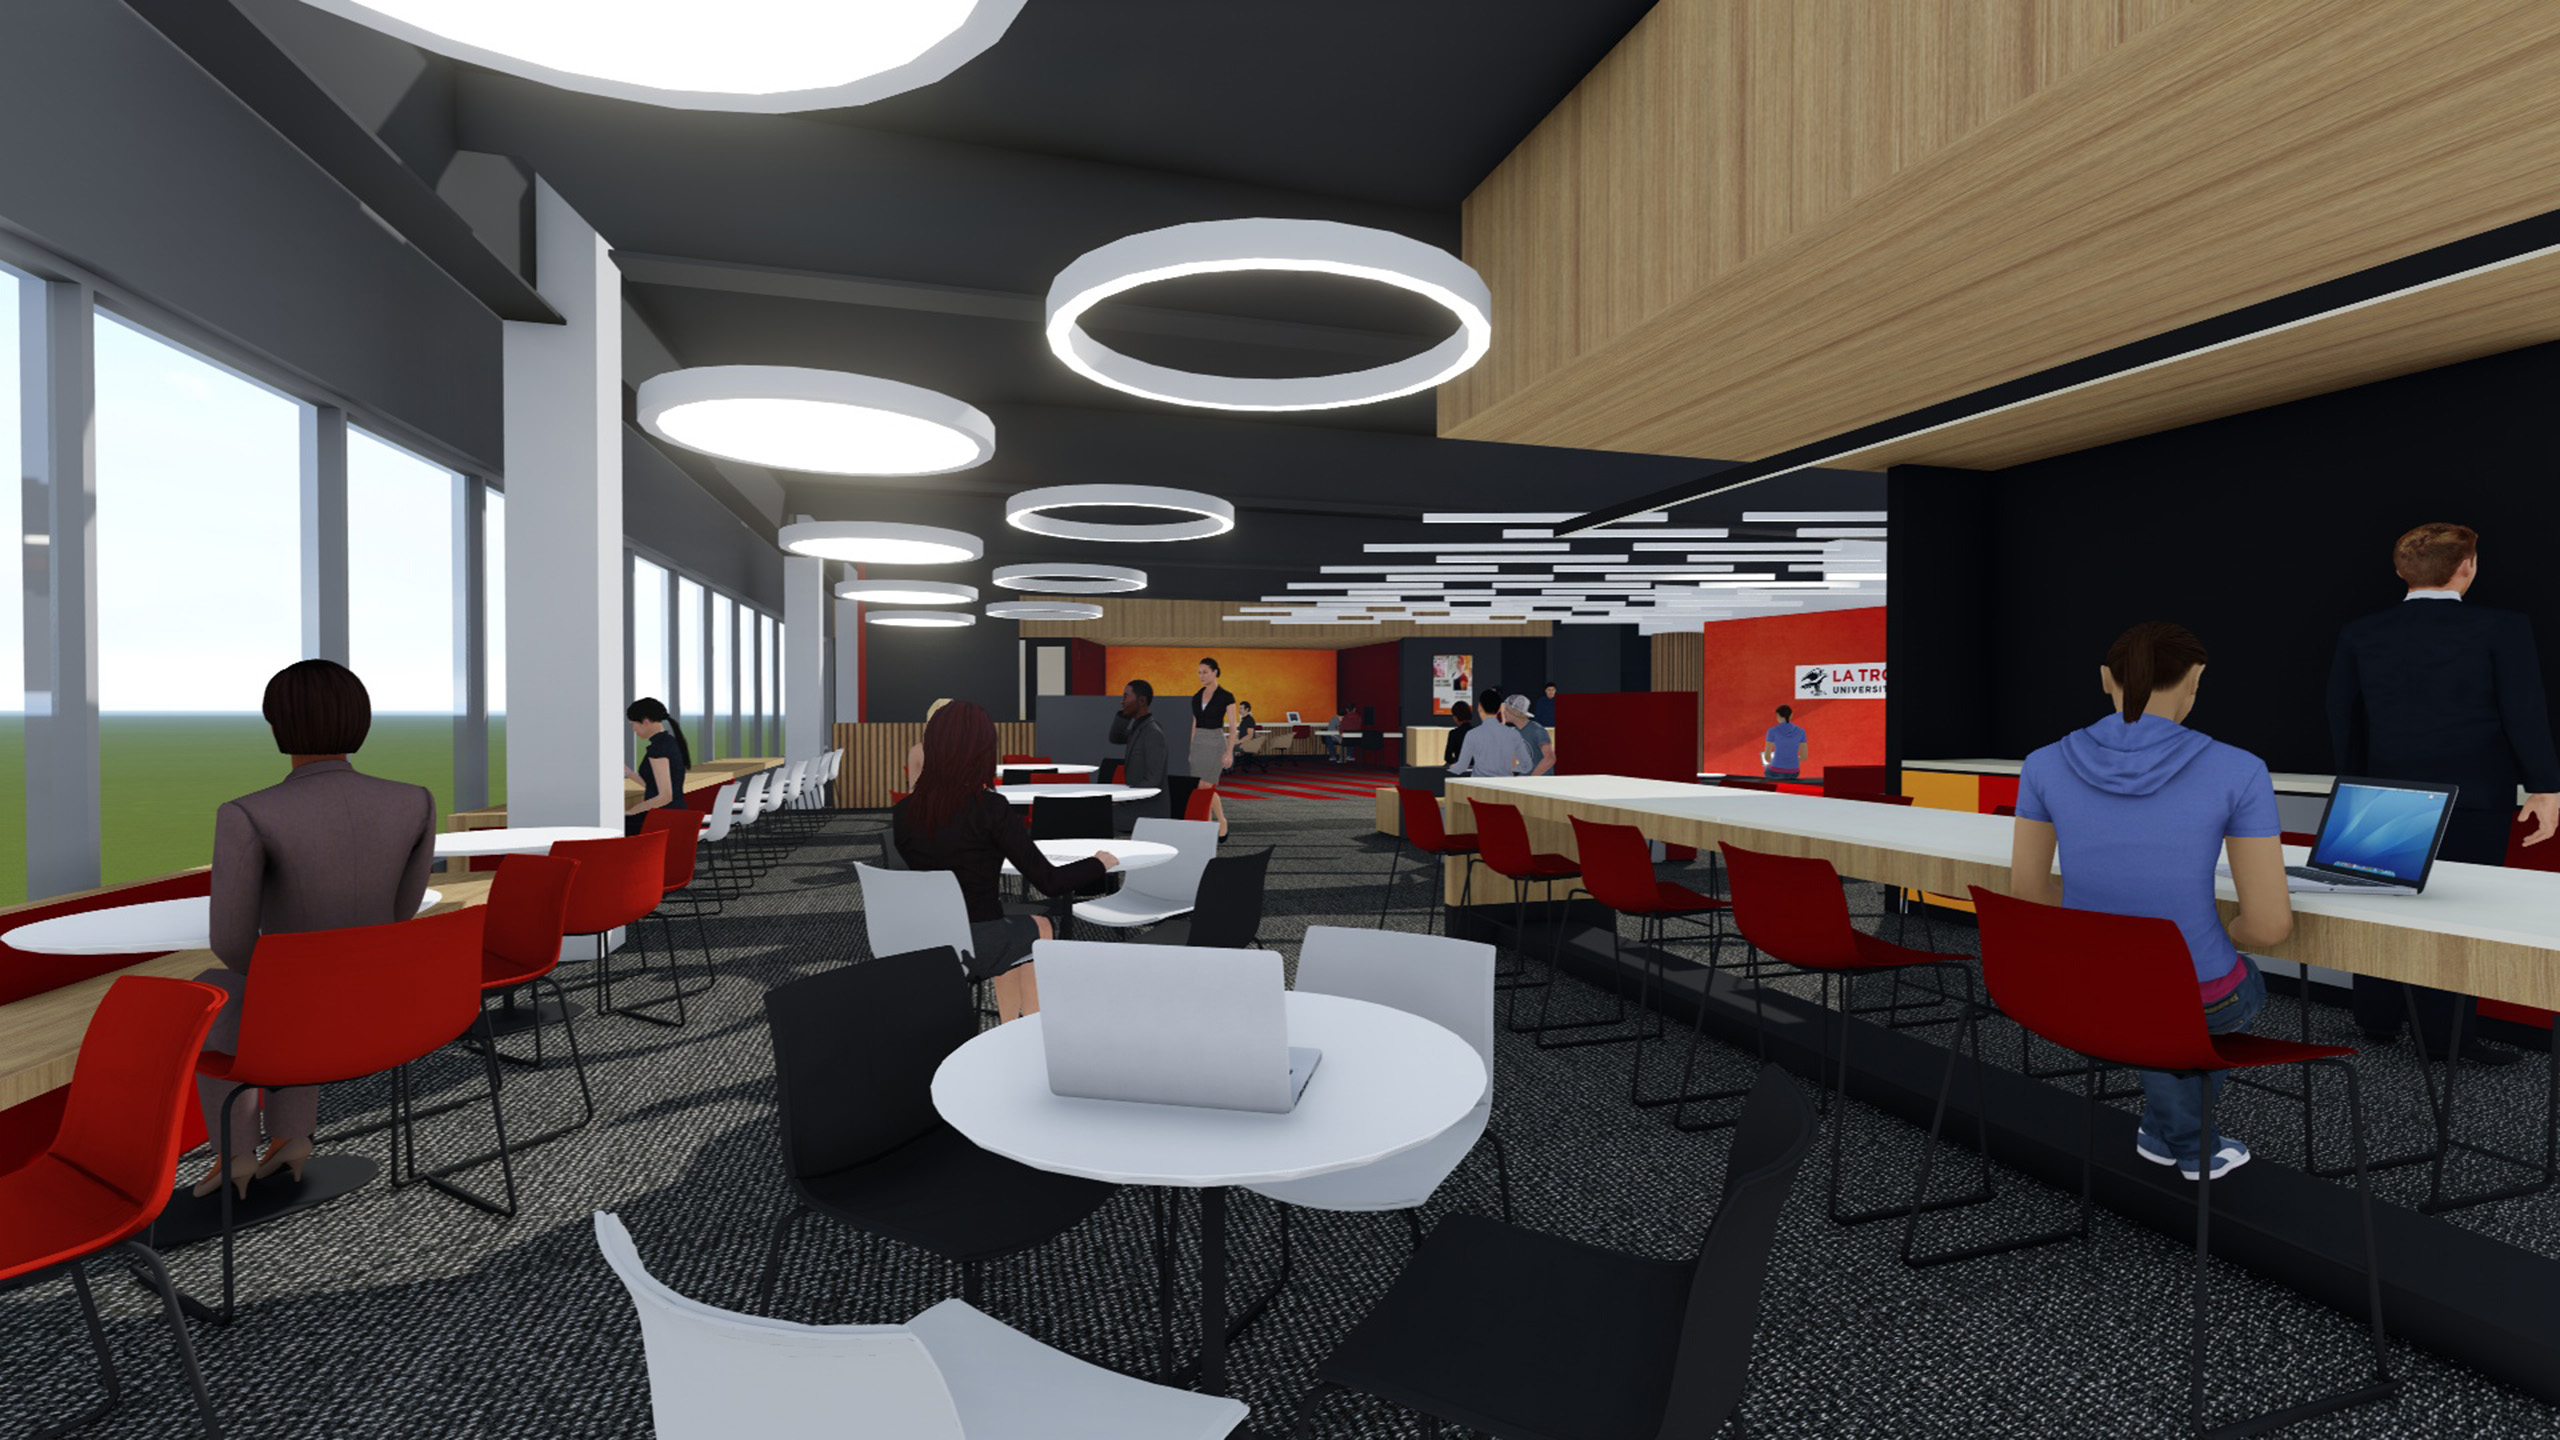 Level 2, informal study area, looking towards the reception